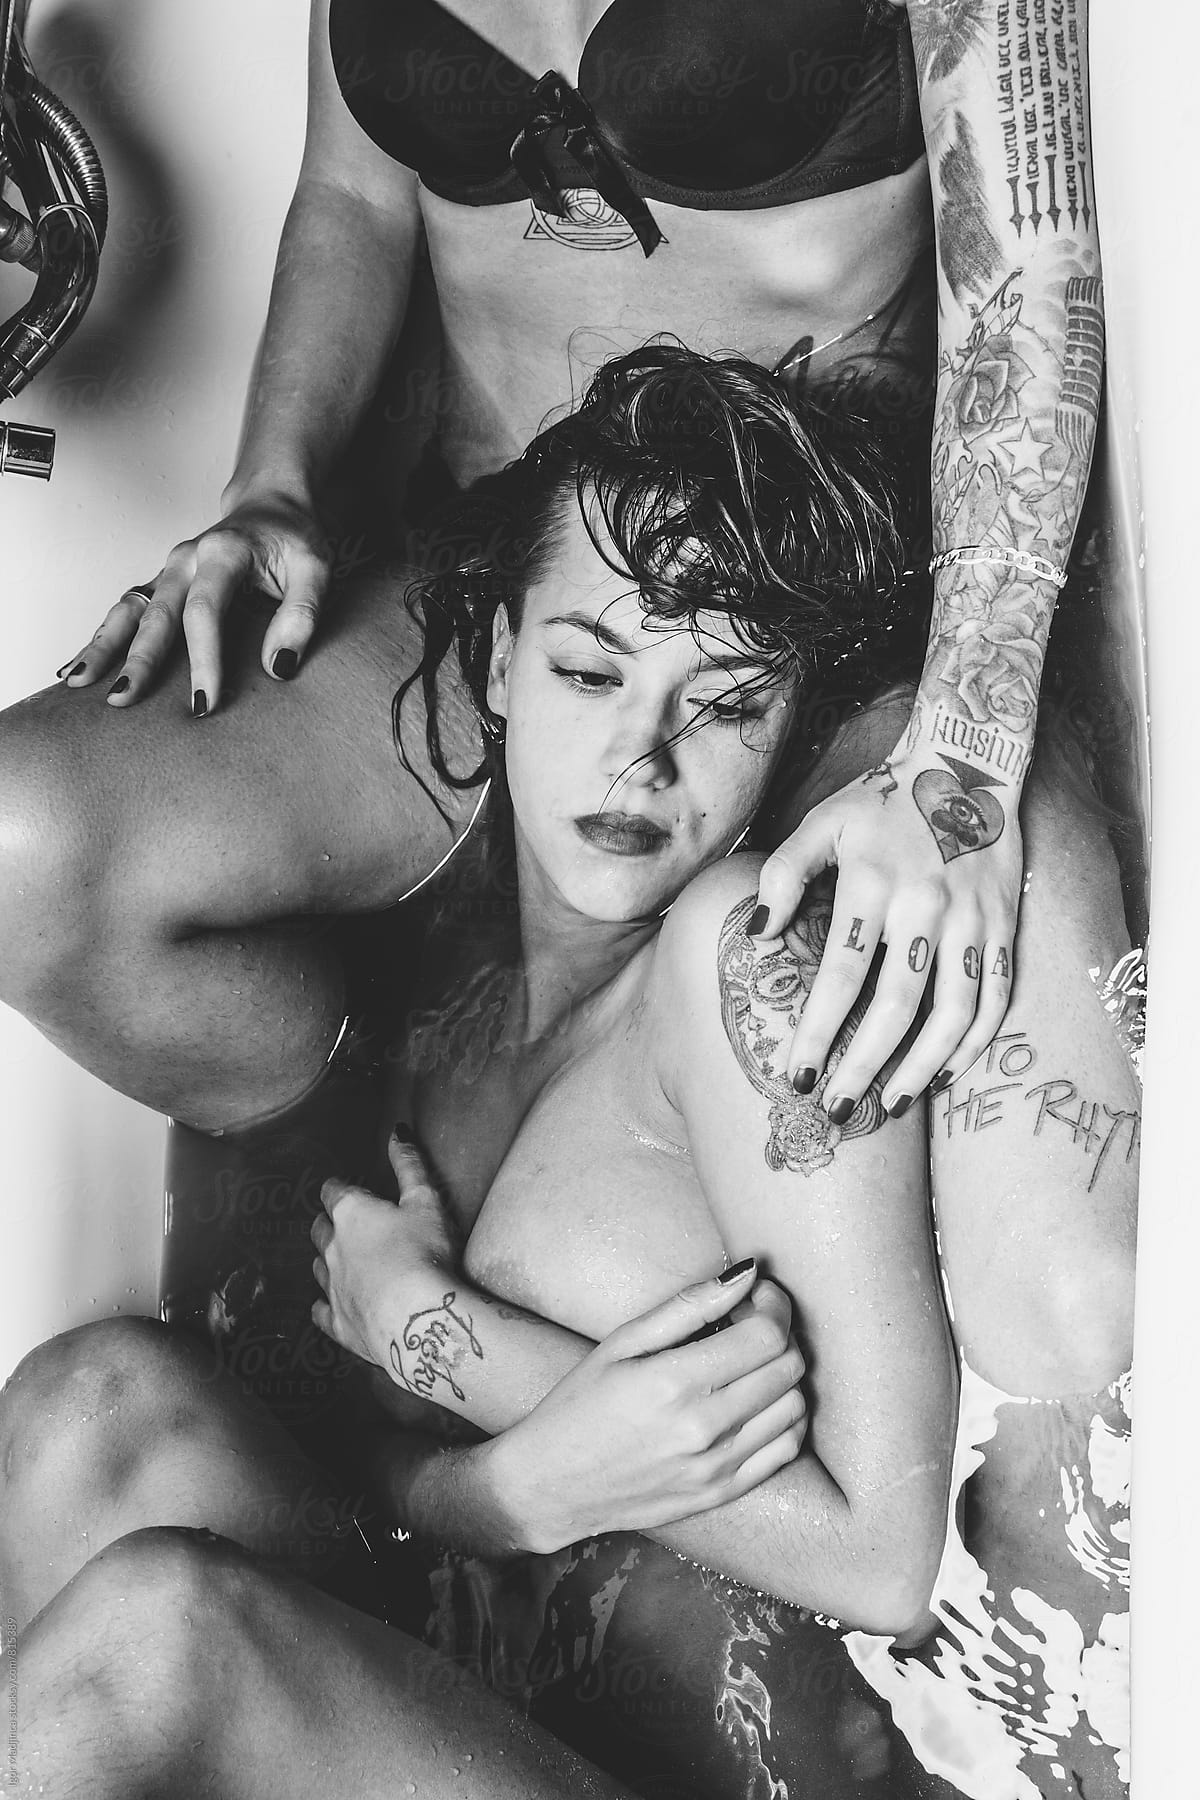 touch , two beautiful tattooed girl in a bathtub black and white